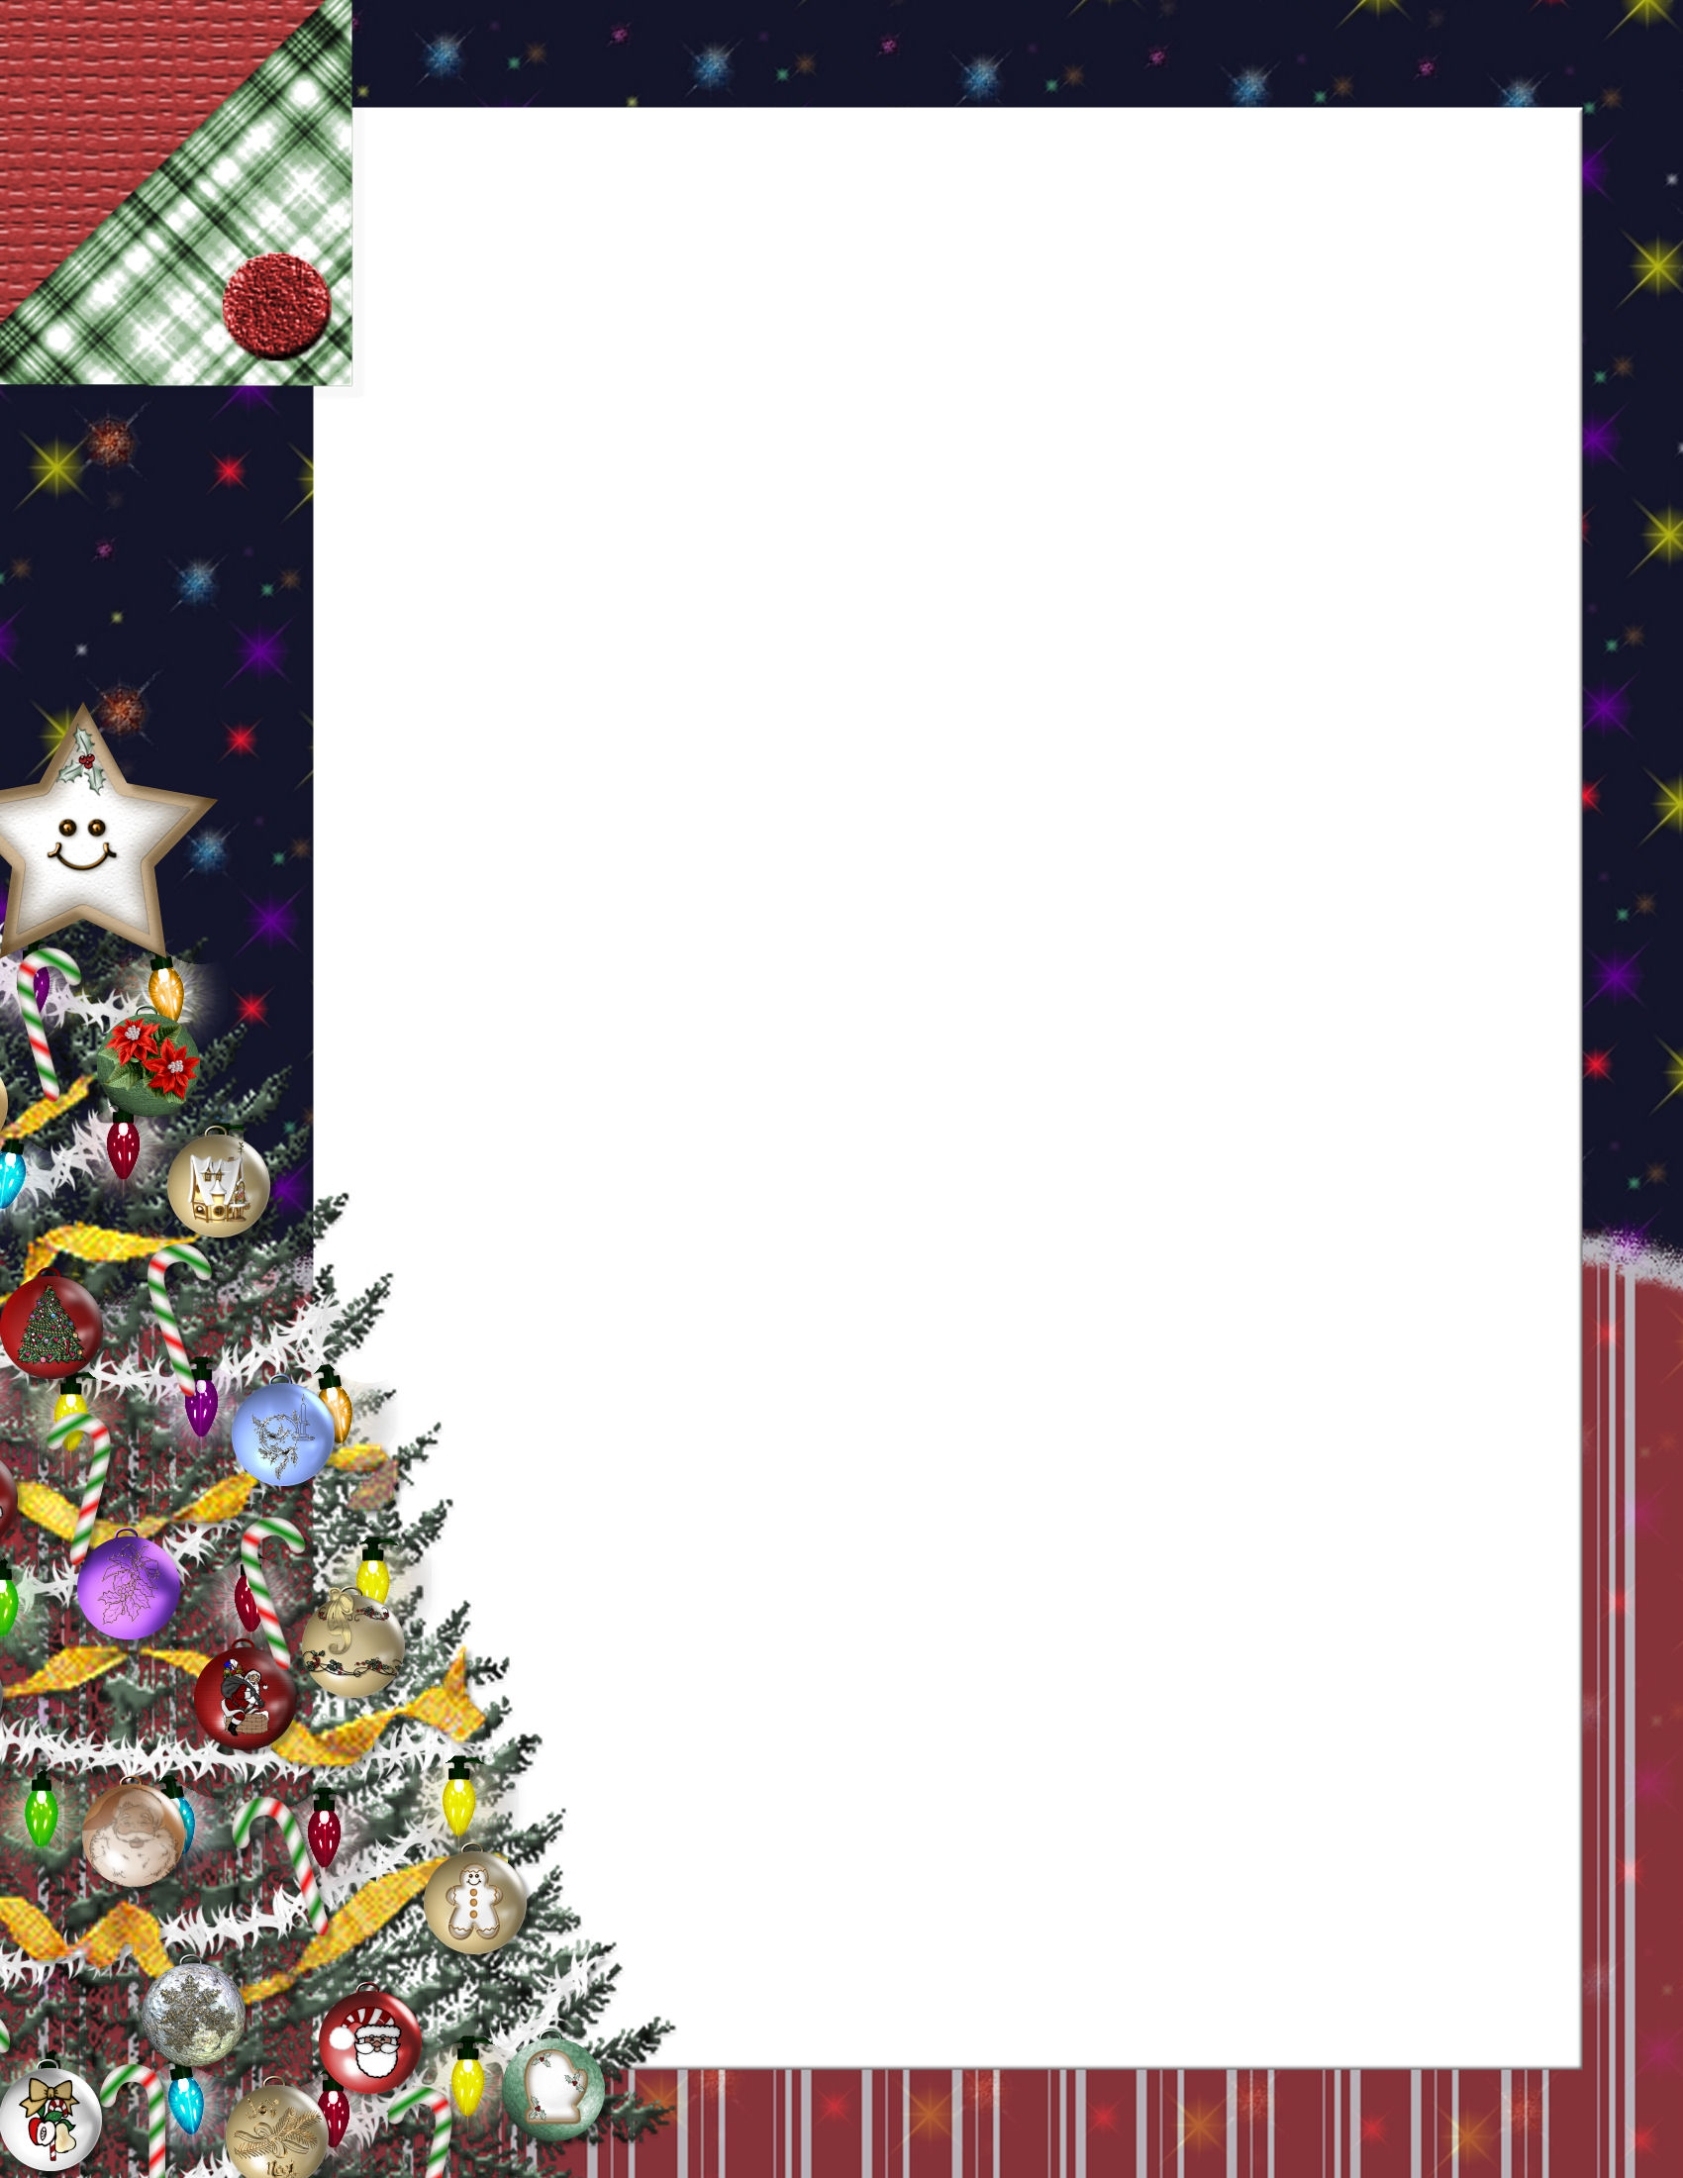 Christmas 1 Free Stationery Template Downloads Pertaining To Free Christmas Letterhead Templates